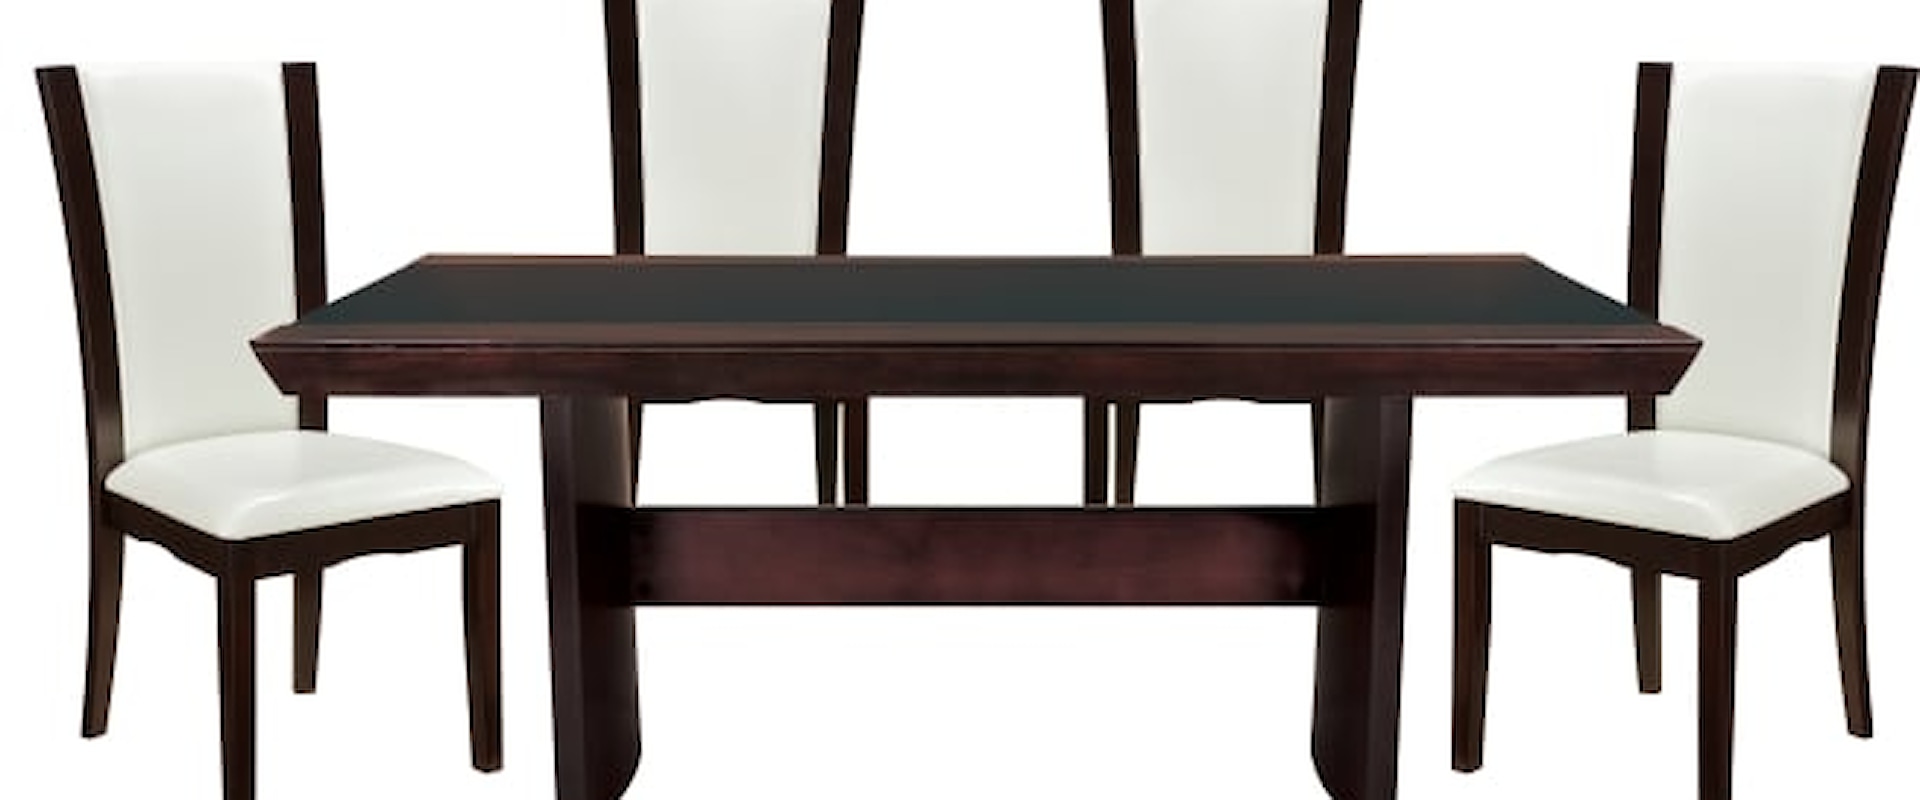 Transitional 5-Piece Dining Set with Glass Insert Table Top